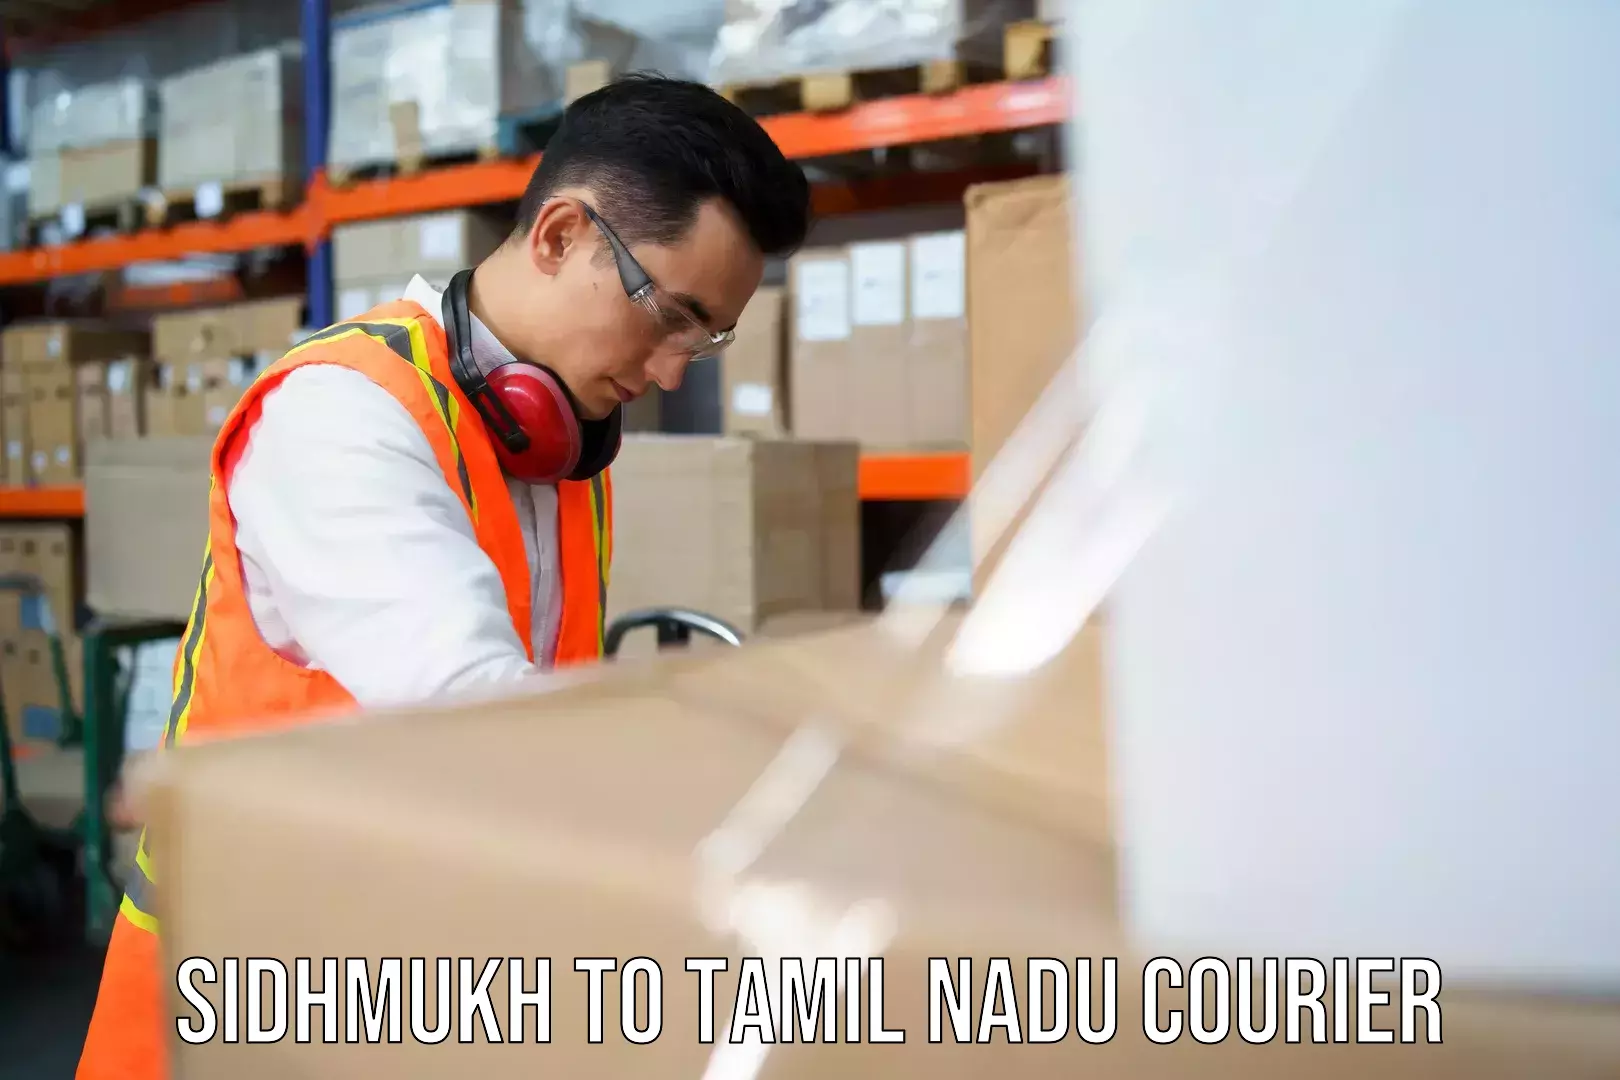 Multi-national courier services Sidhmukh to The Gandhigram Rural Institute